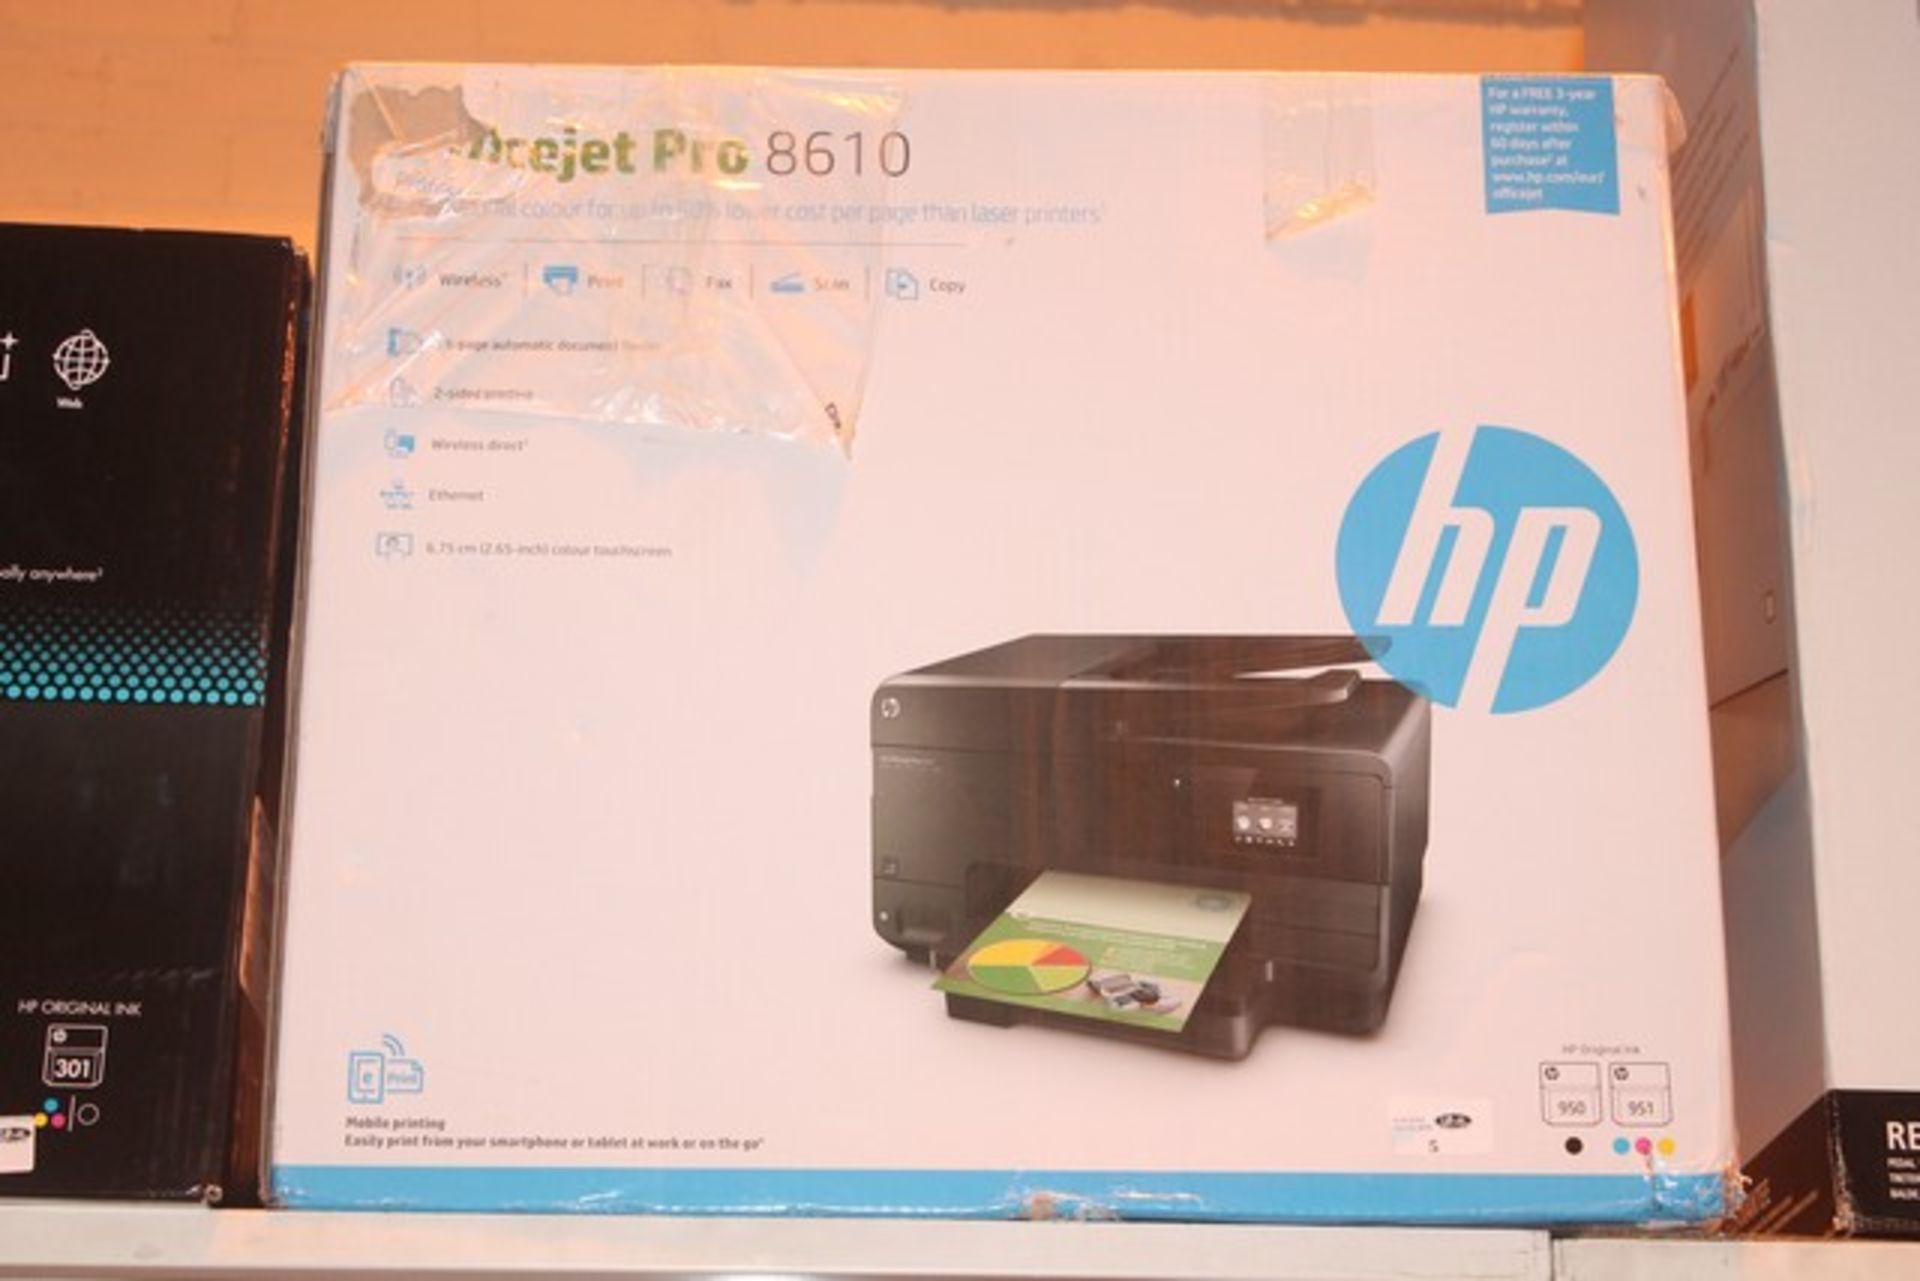 1 x HP OFFICE JET 8610 ALL IN ONE PRINTER SCANNER COPIER (546628)  *PLEASE NOTE THAT THE BID PRICE